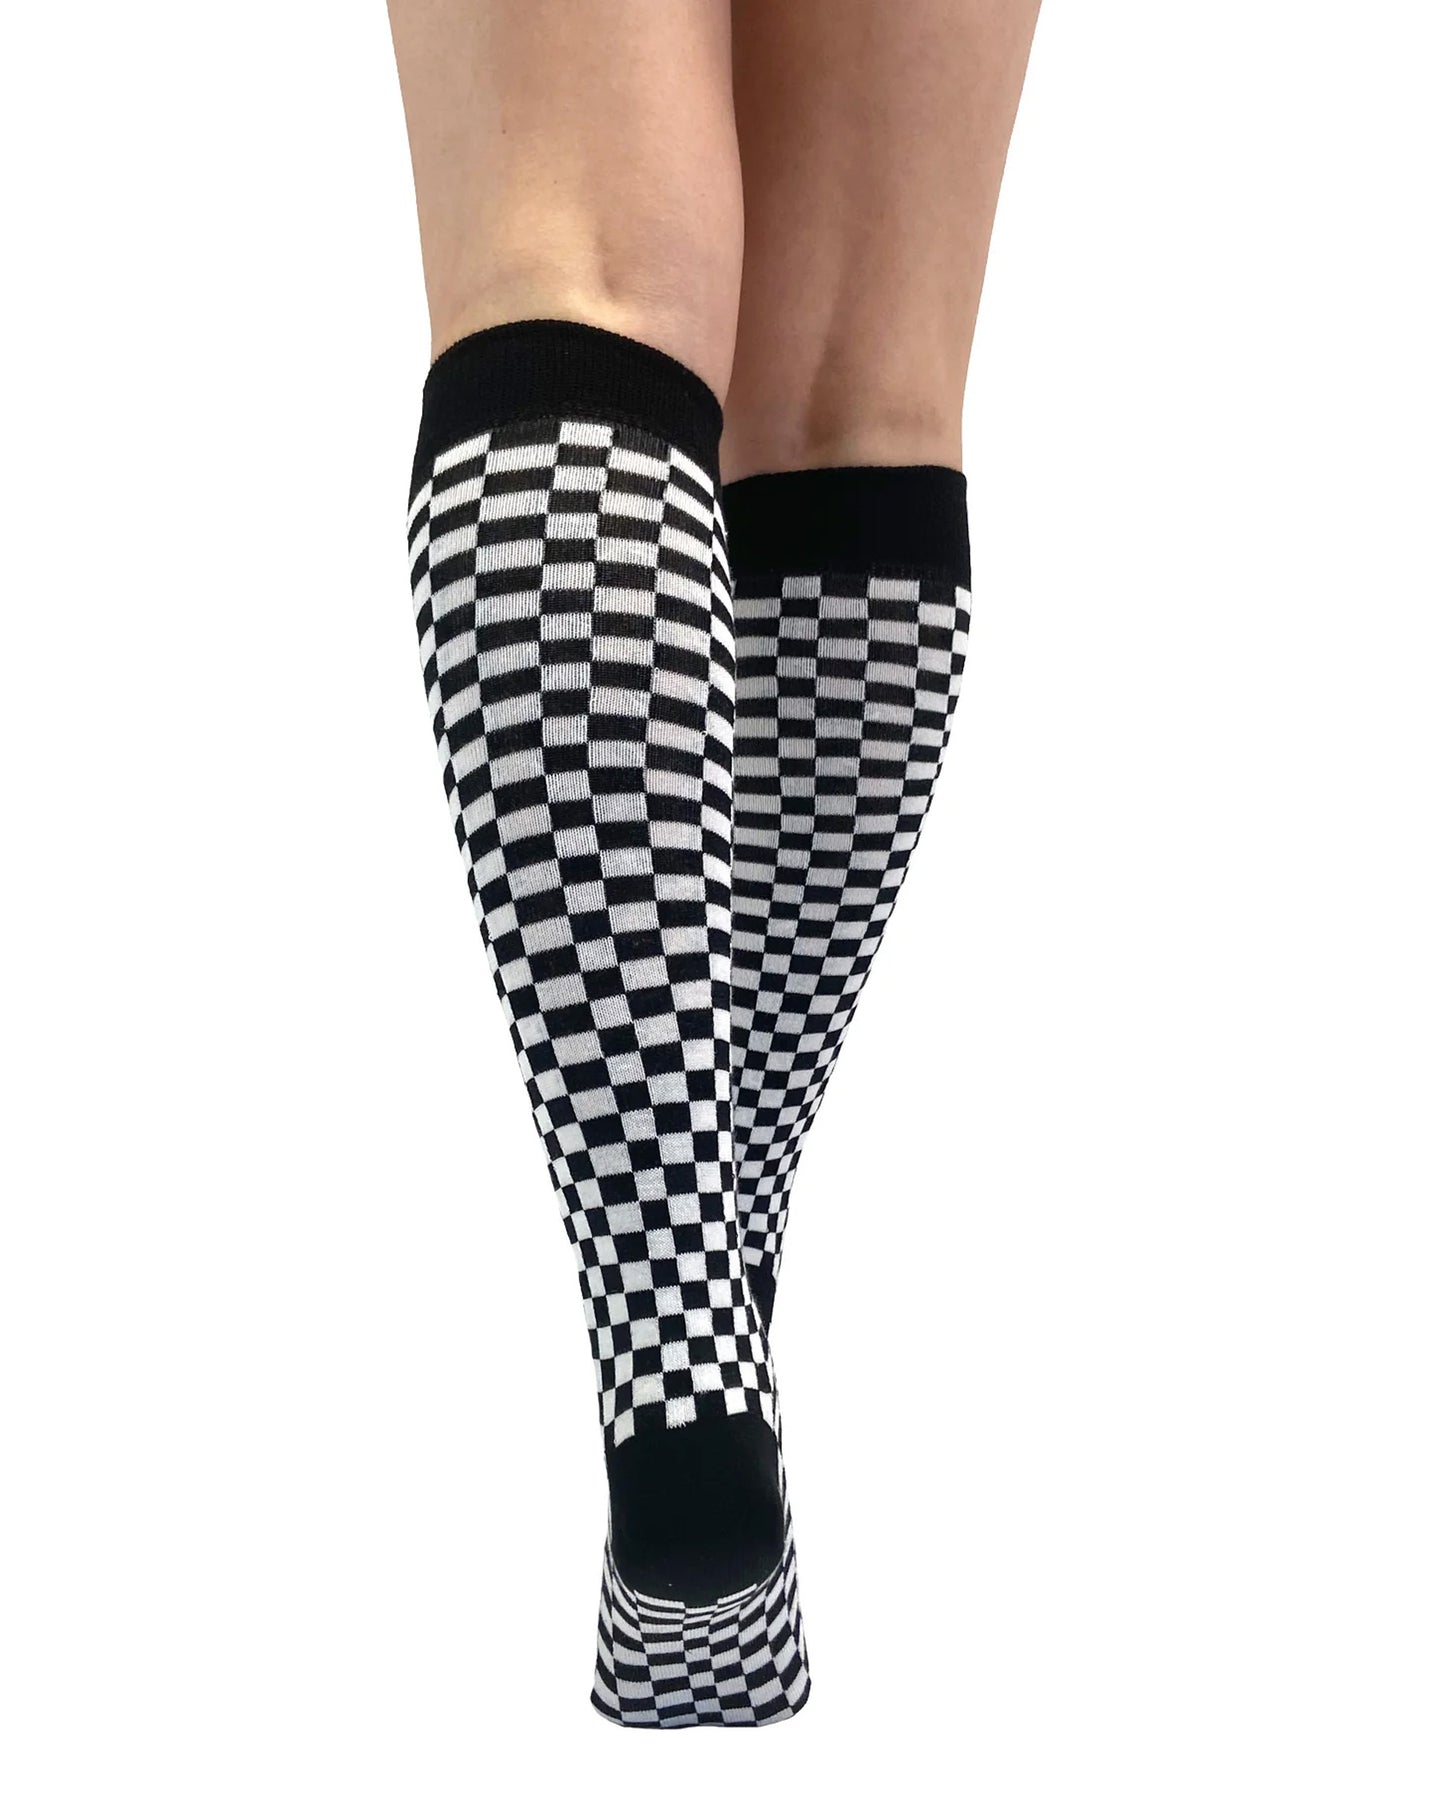 Pamela Mann Checkered Knee-Highs - Black and white checkered square patterned knee-high cotton socks with black cuff, toe and heel. Back view.